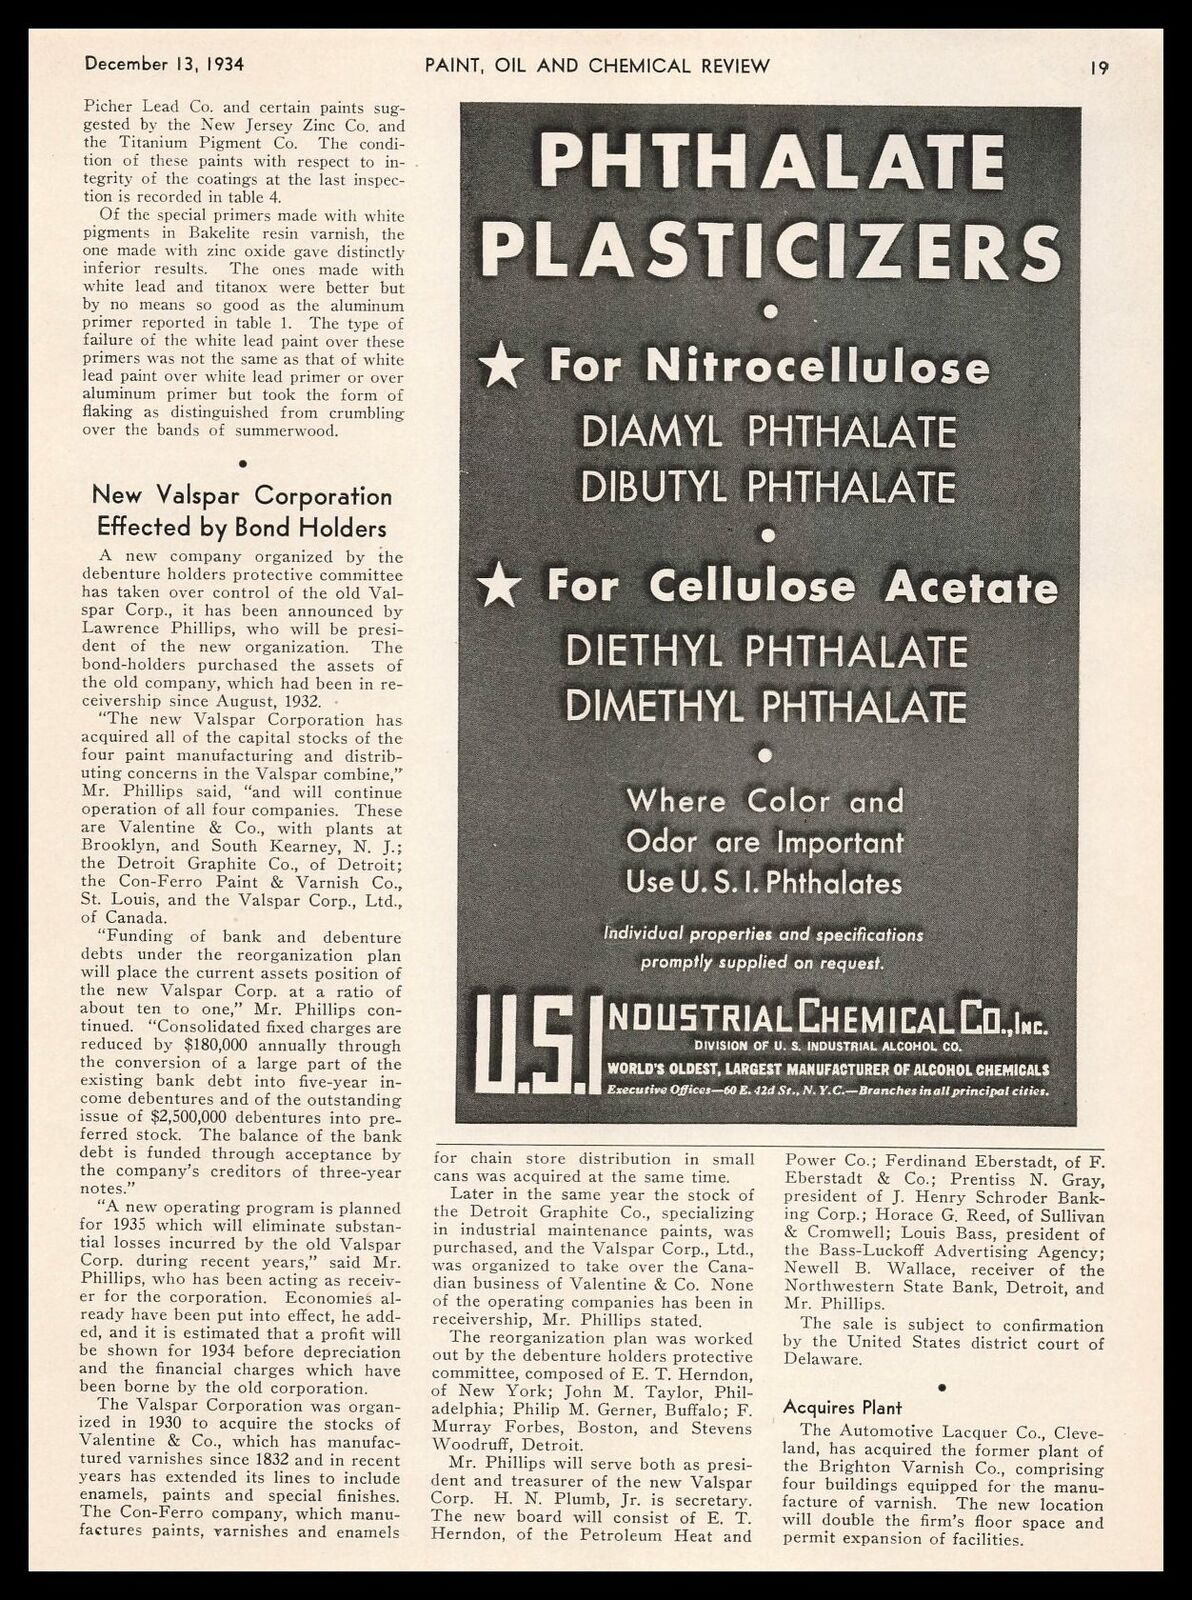 1934 U.S. Industrial Chemical Company Phthalate Plasticizers Vintage Print Ad